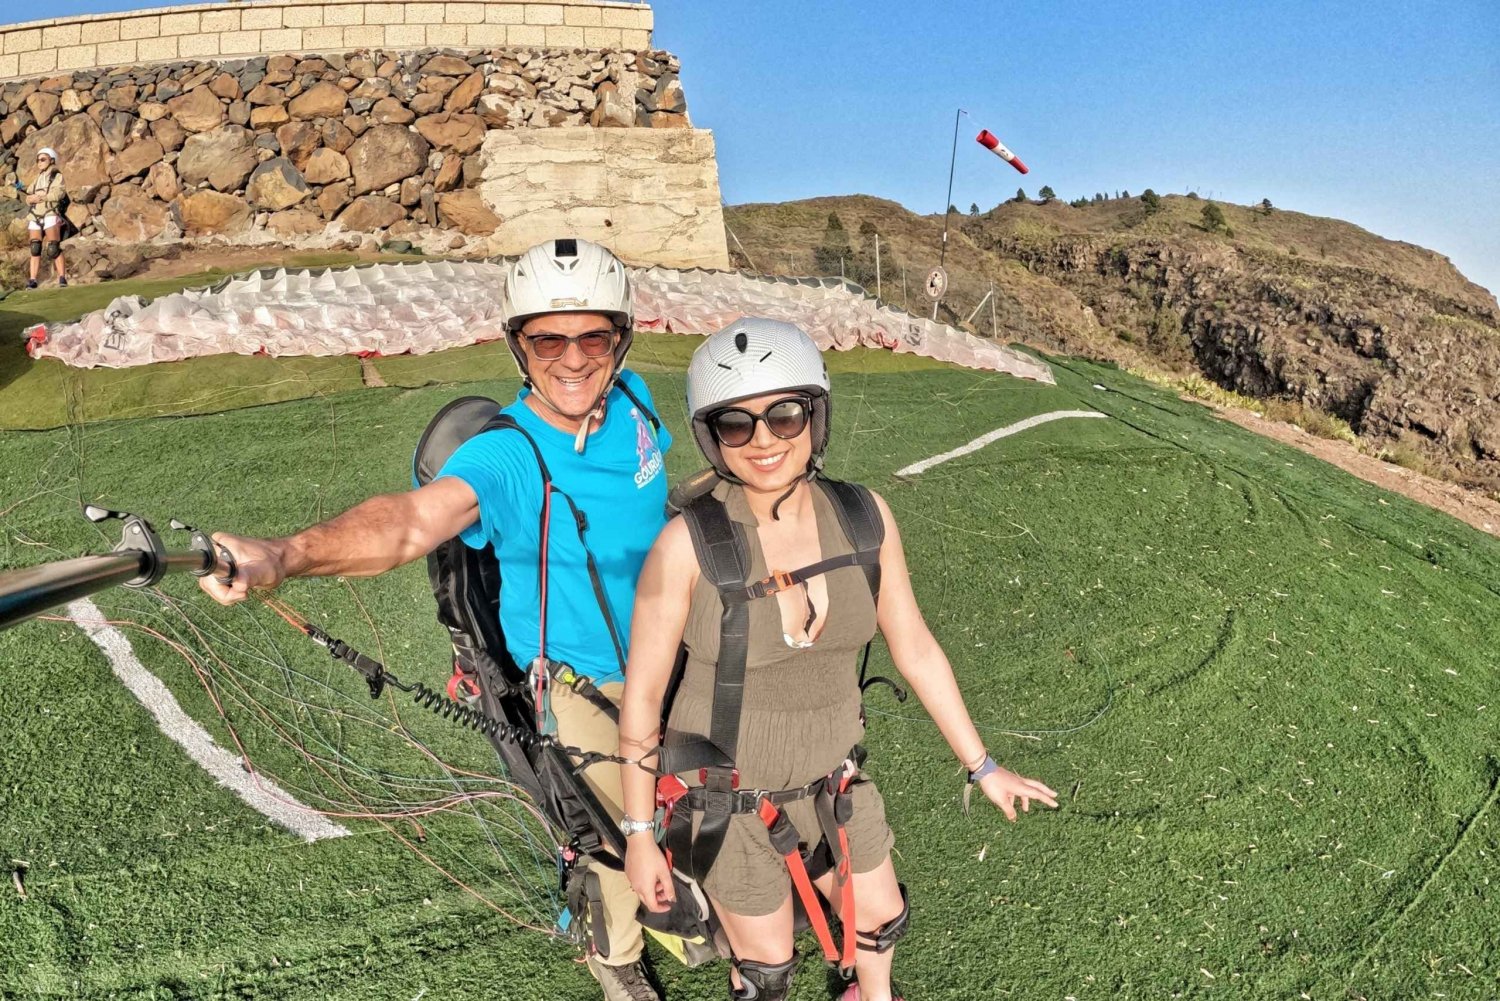 Paragliding flight with a Spanish Champion 2021/2022.